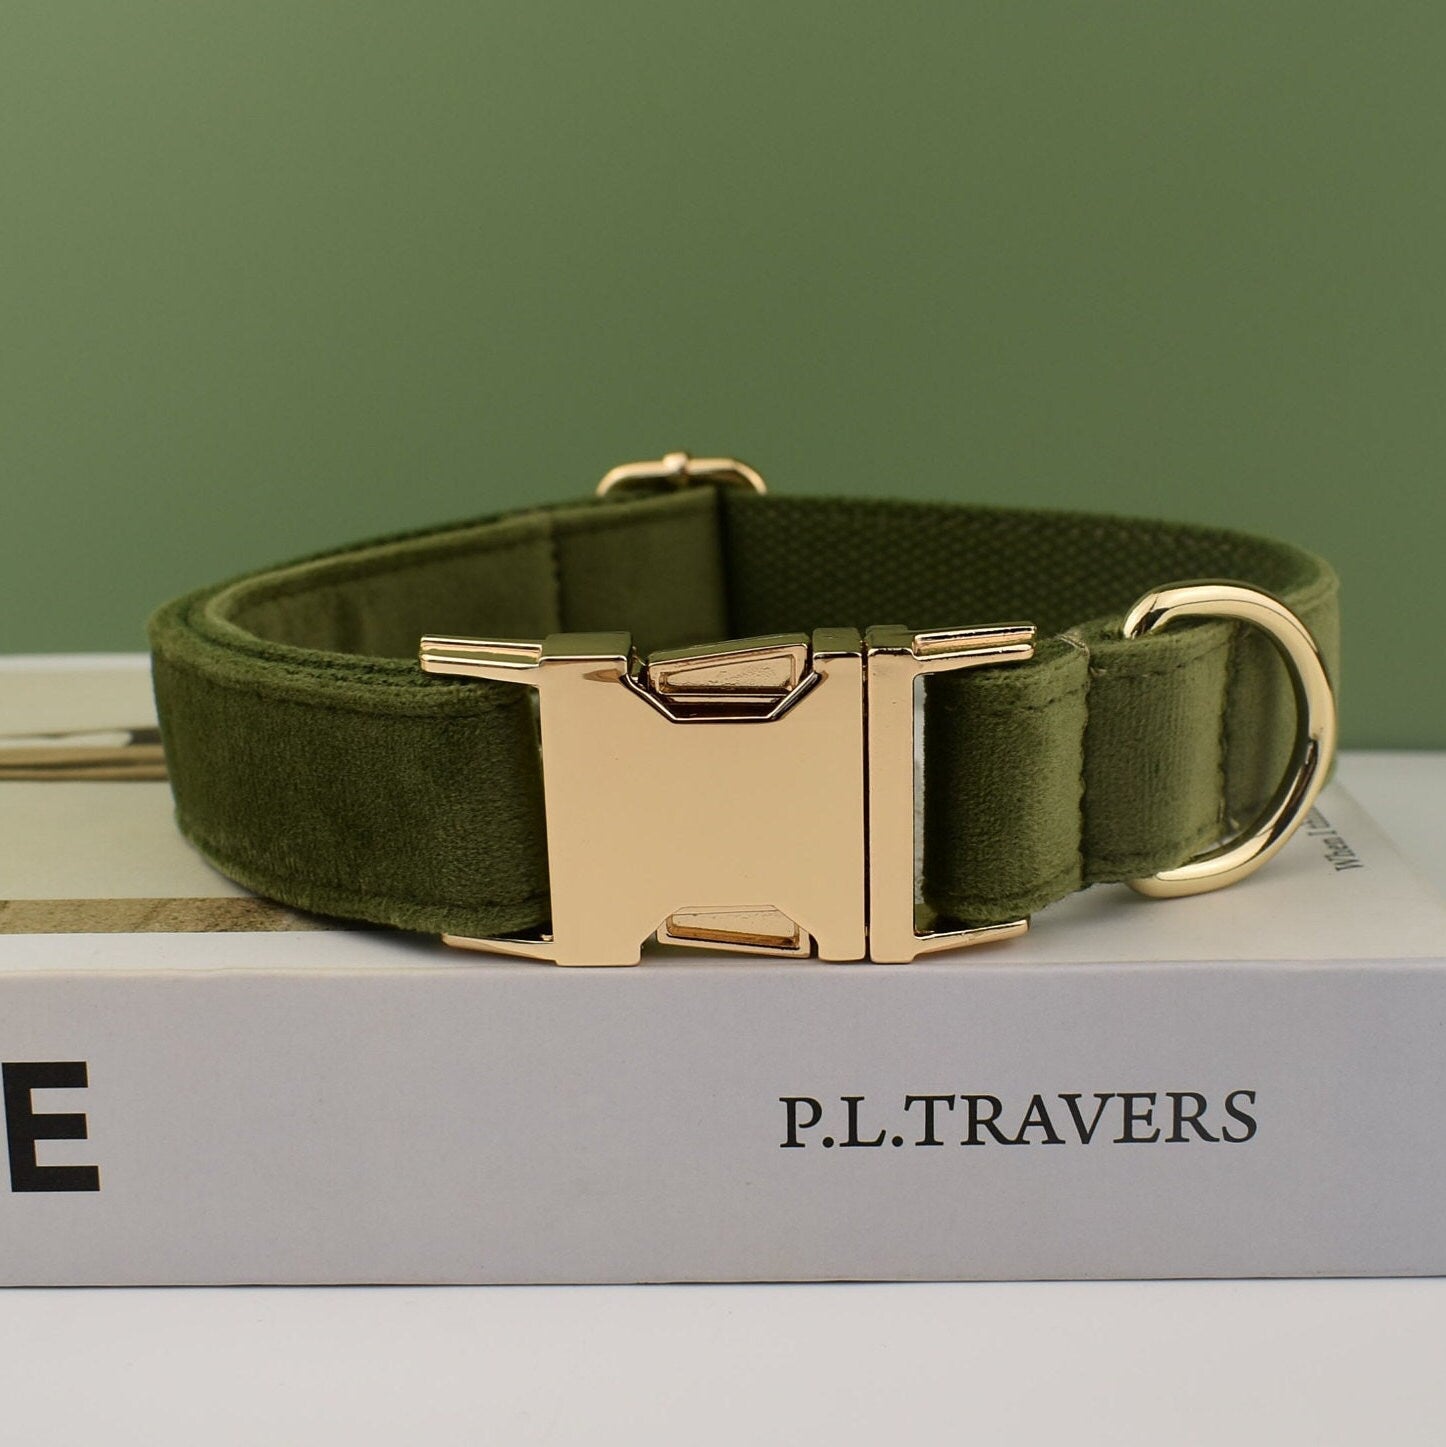 Personalized Engraved Handmade Velvet Dog Collar or Dog Lead Set, Matching Bowtie and Harness in Army Green and Solid Pattern